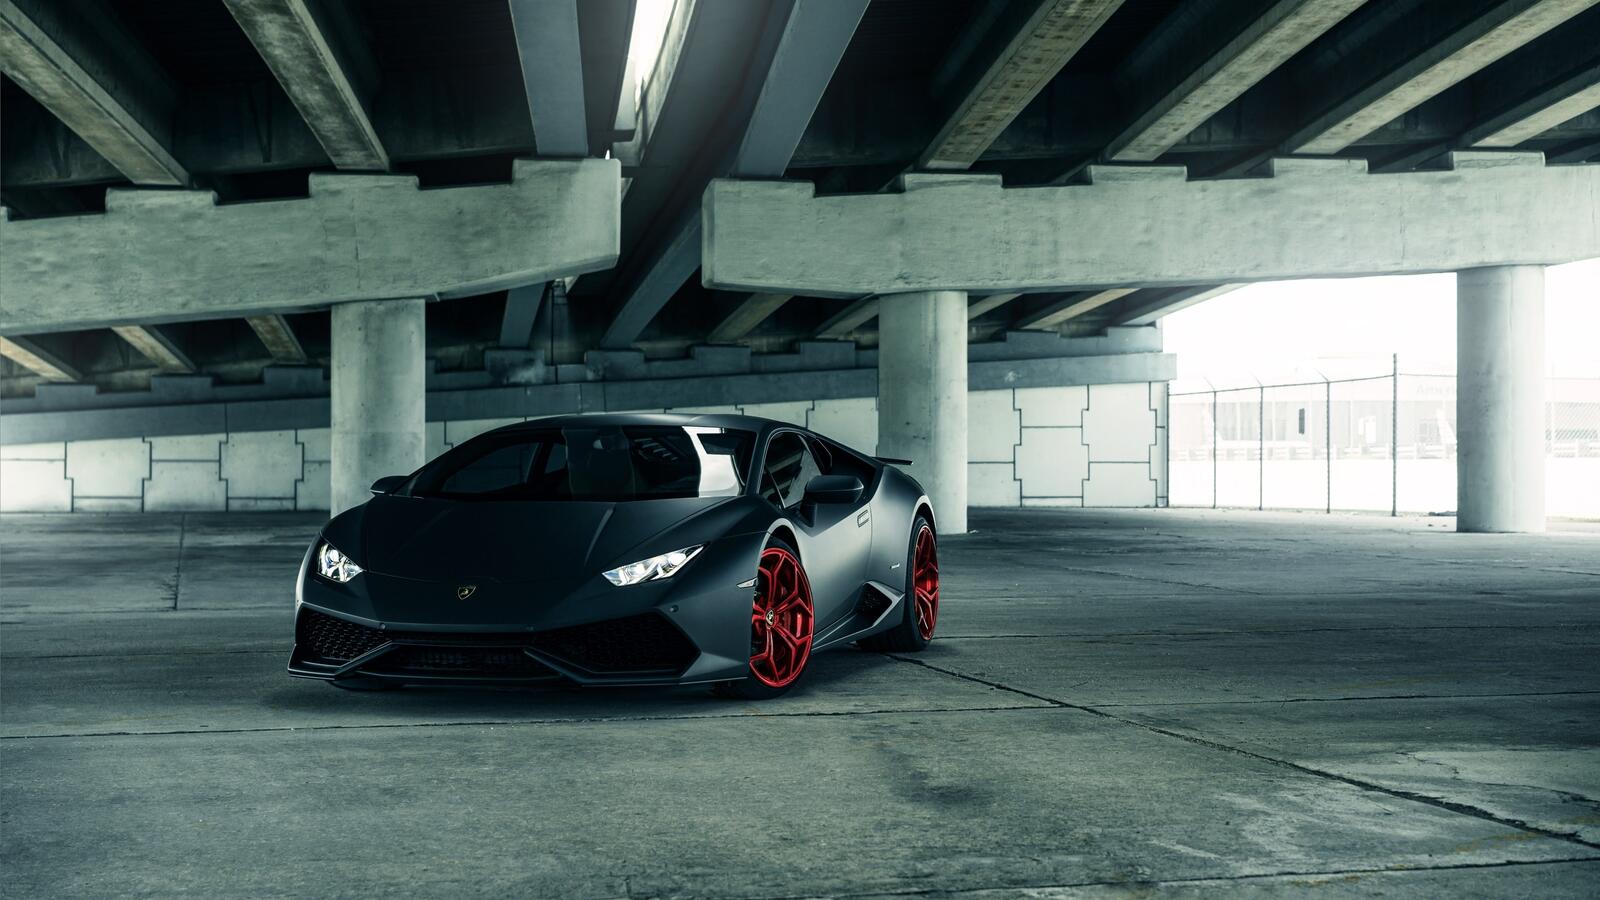 Wallpapers Lamborghini Huracan front view sports cars on the desktop